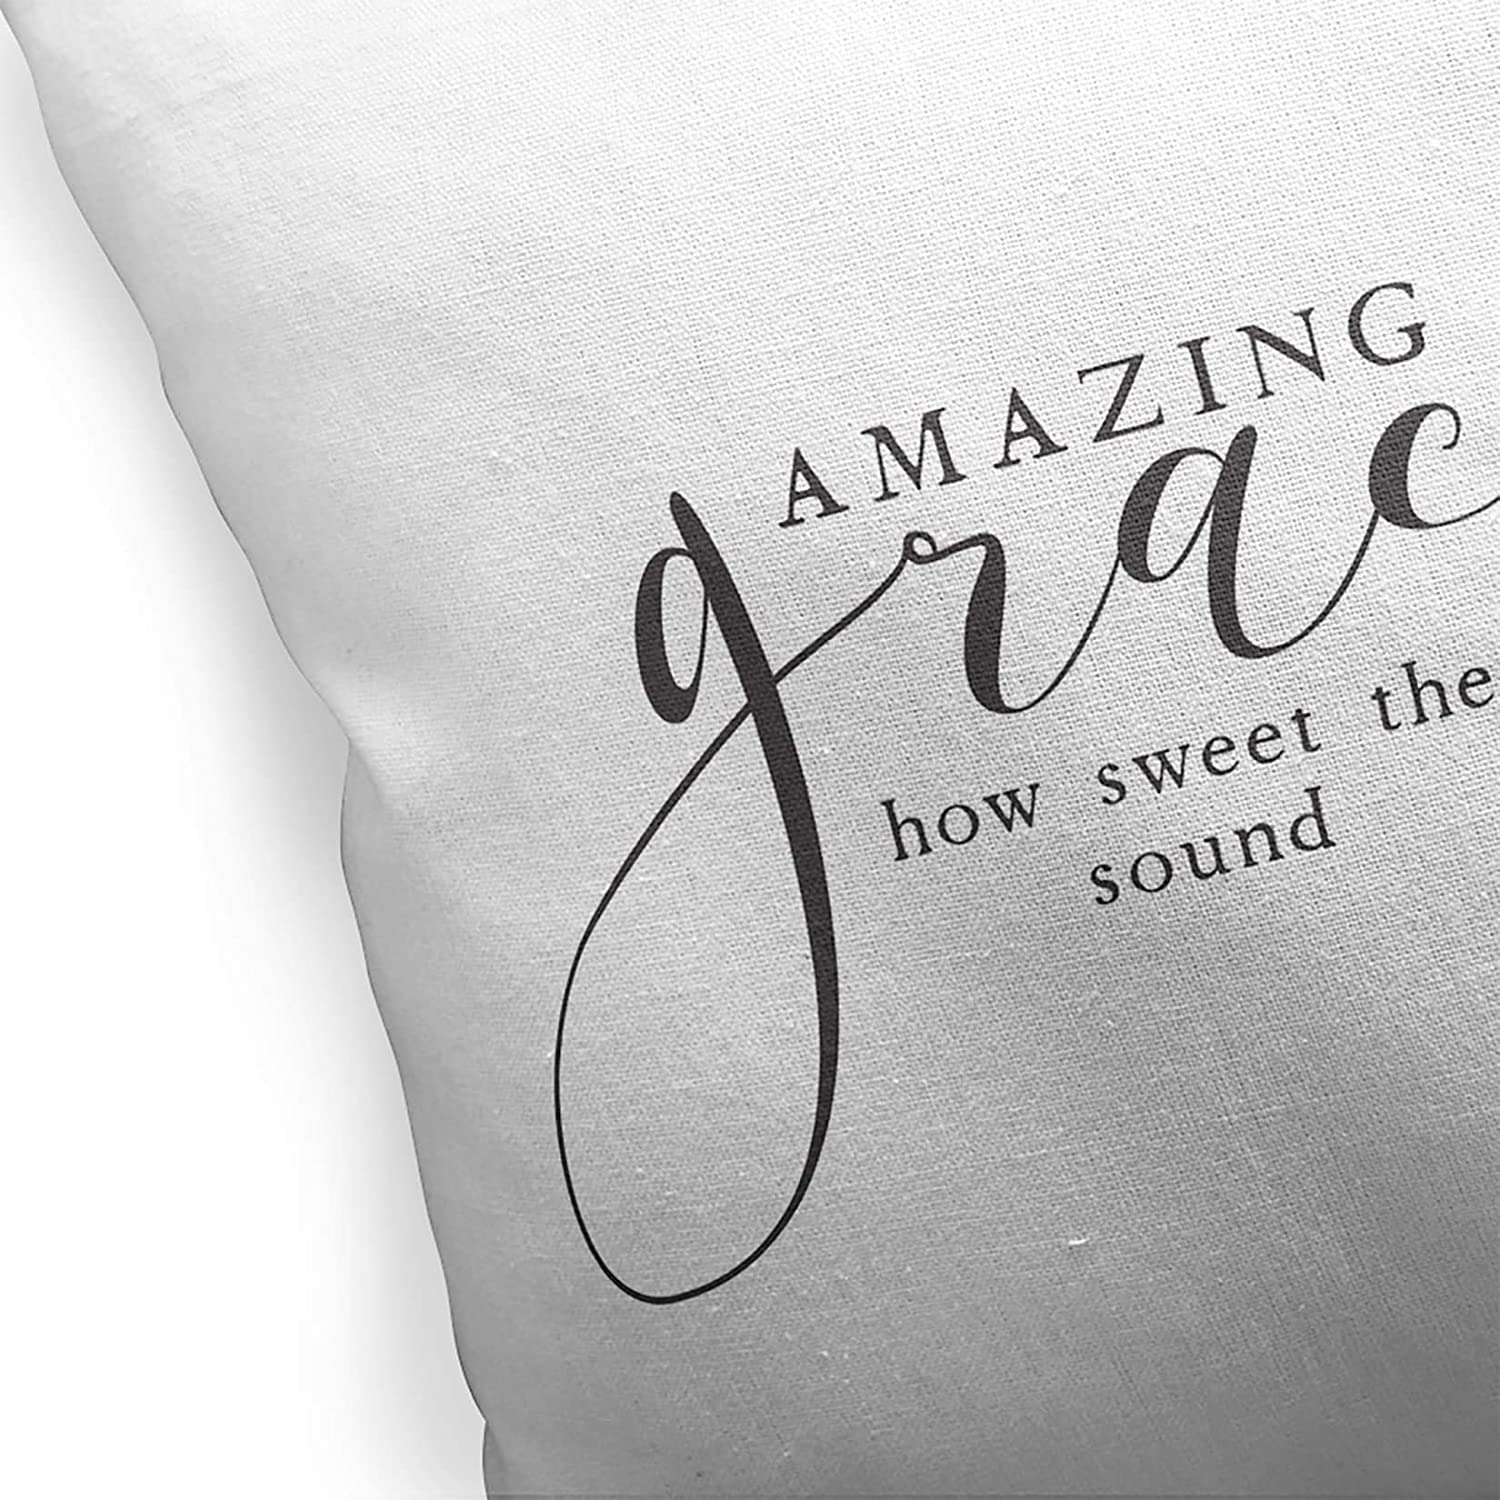 MISC Amazing Indoor|Outdoor Pillow by 18x18 Black Farmhouse Polyester Removable Cover